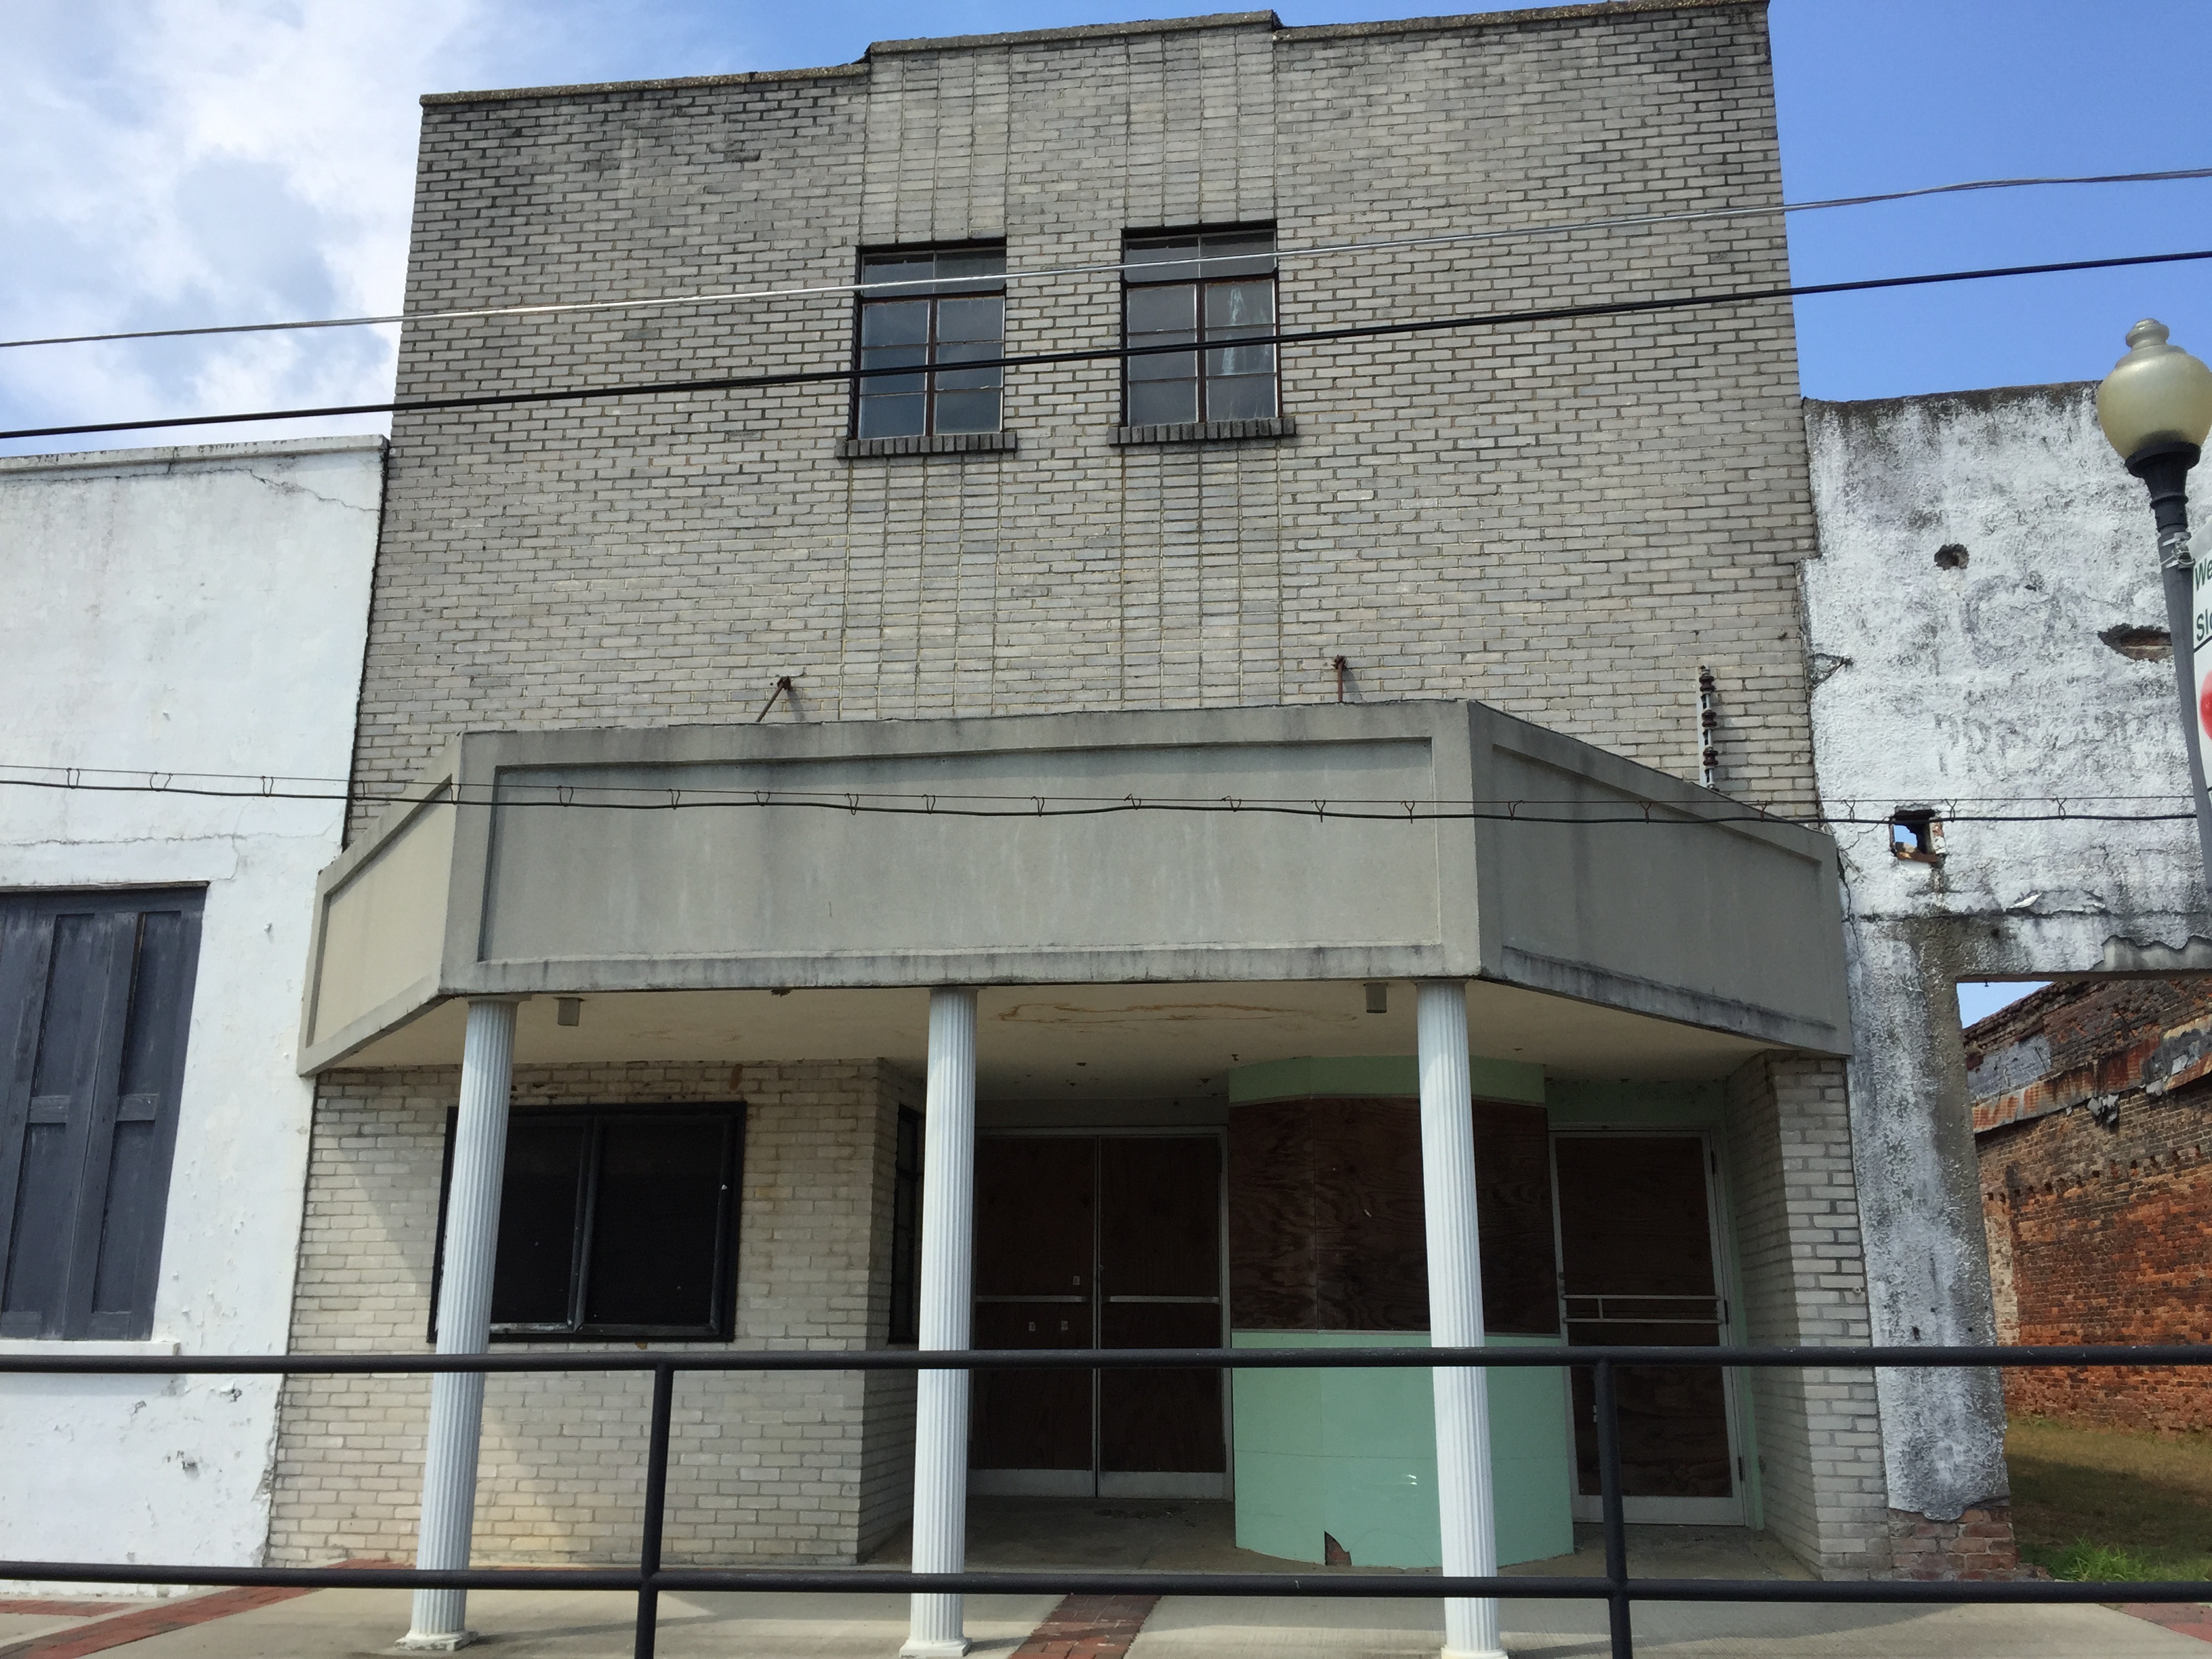 Slocomb Movie theater We are looking to renovate this awesome movie theater In Slocomb, Alabama We need your help!!! Material, labor, money!! All is very welcome We will have a site for everyone to see the progress as if you where there yourself.